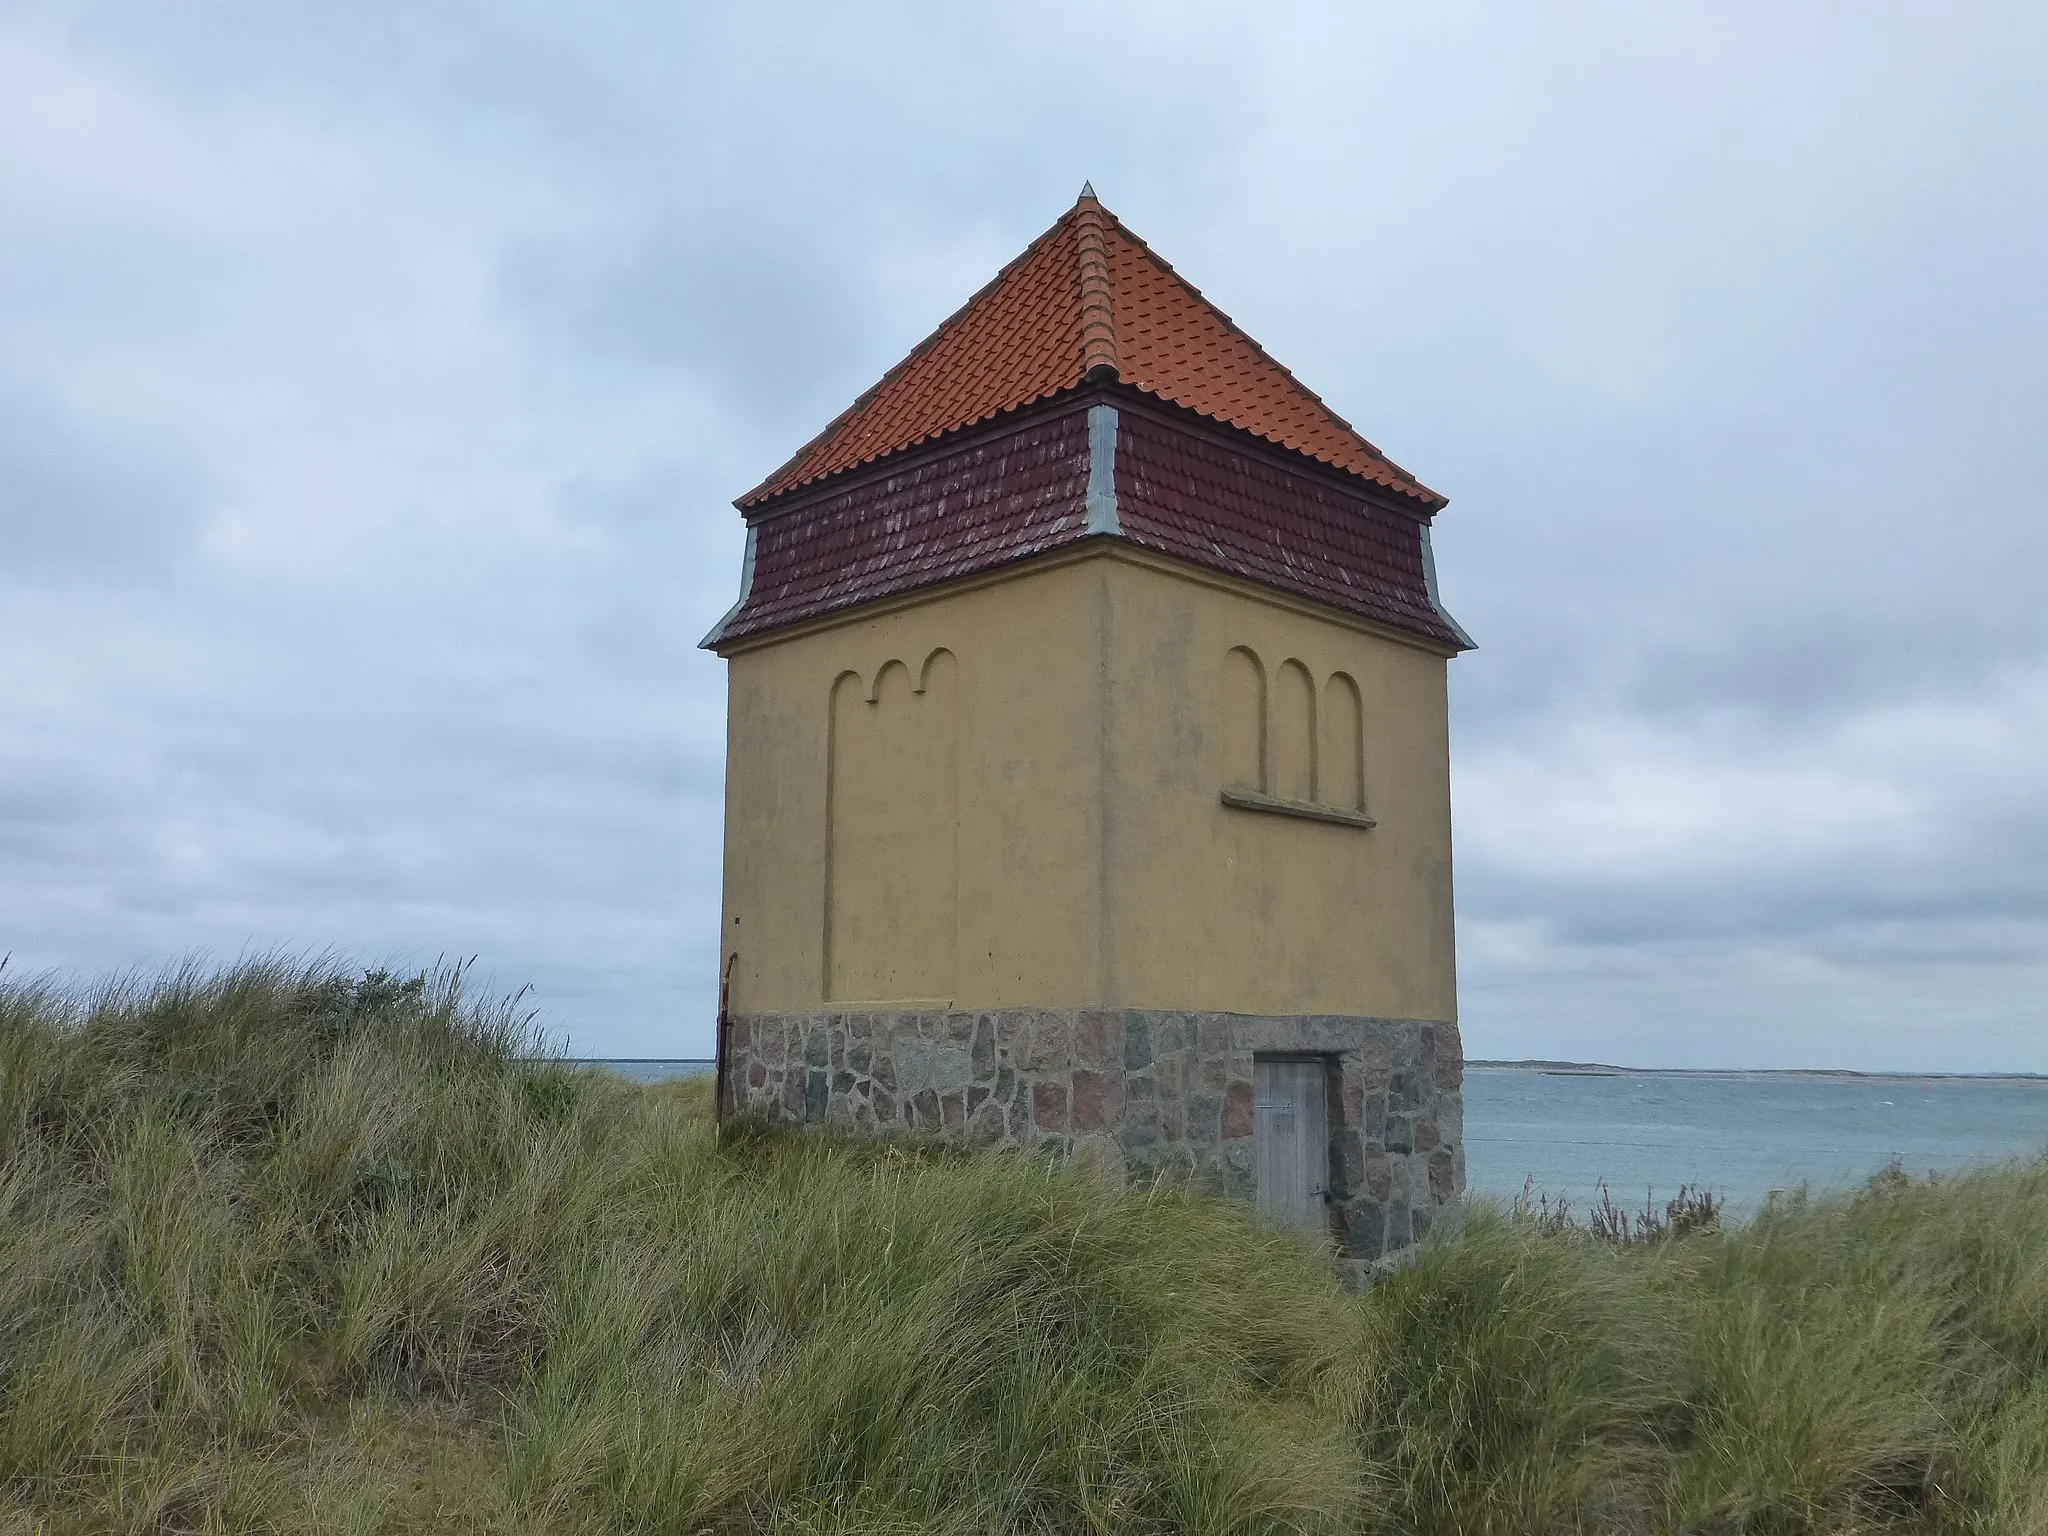 Photo showing: Yellow Tower, former Electrical substation and Landmark of Thyborøn in Denmark.